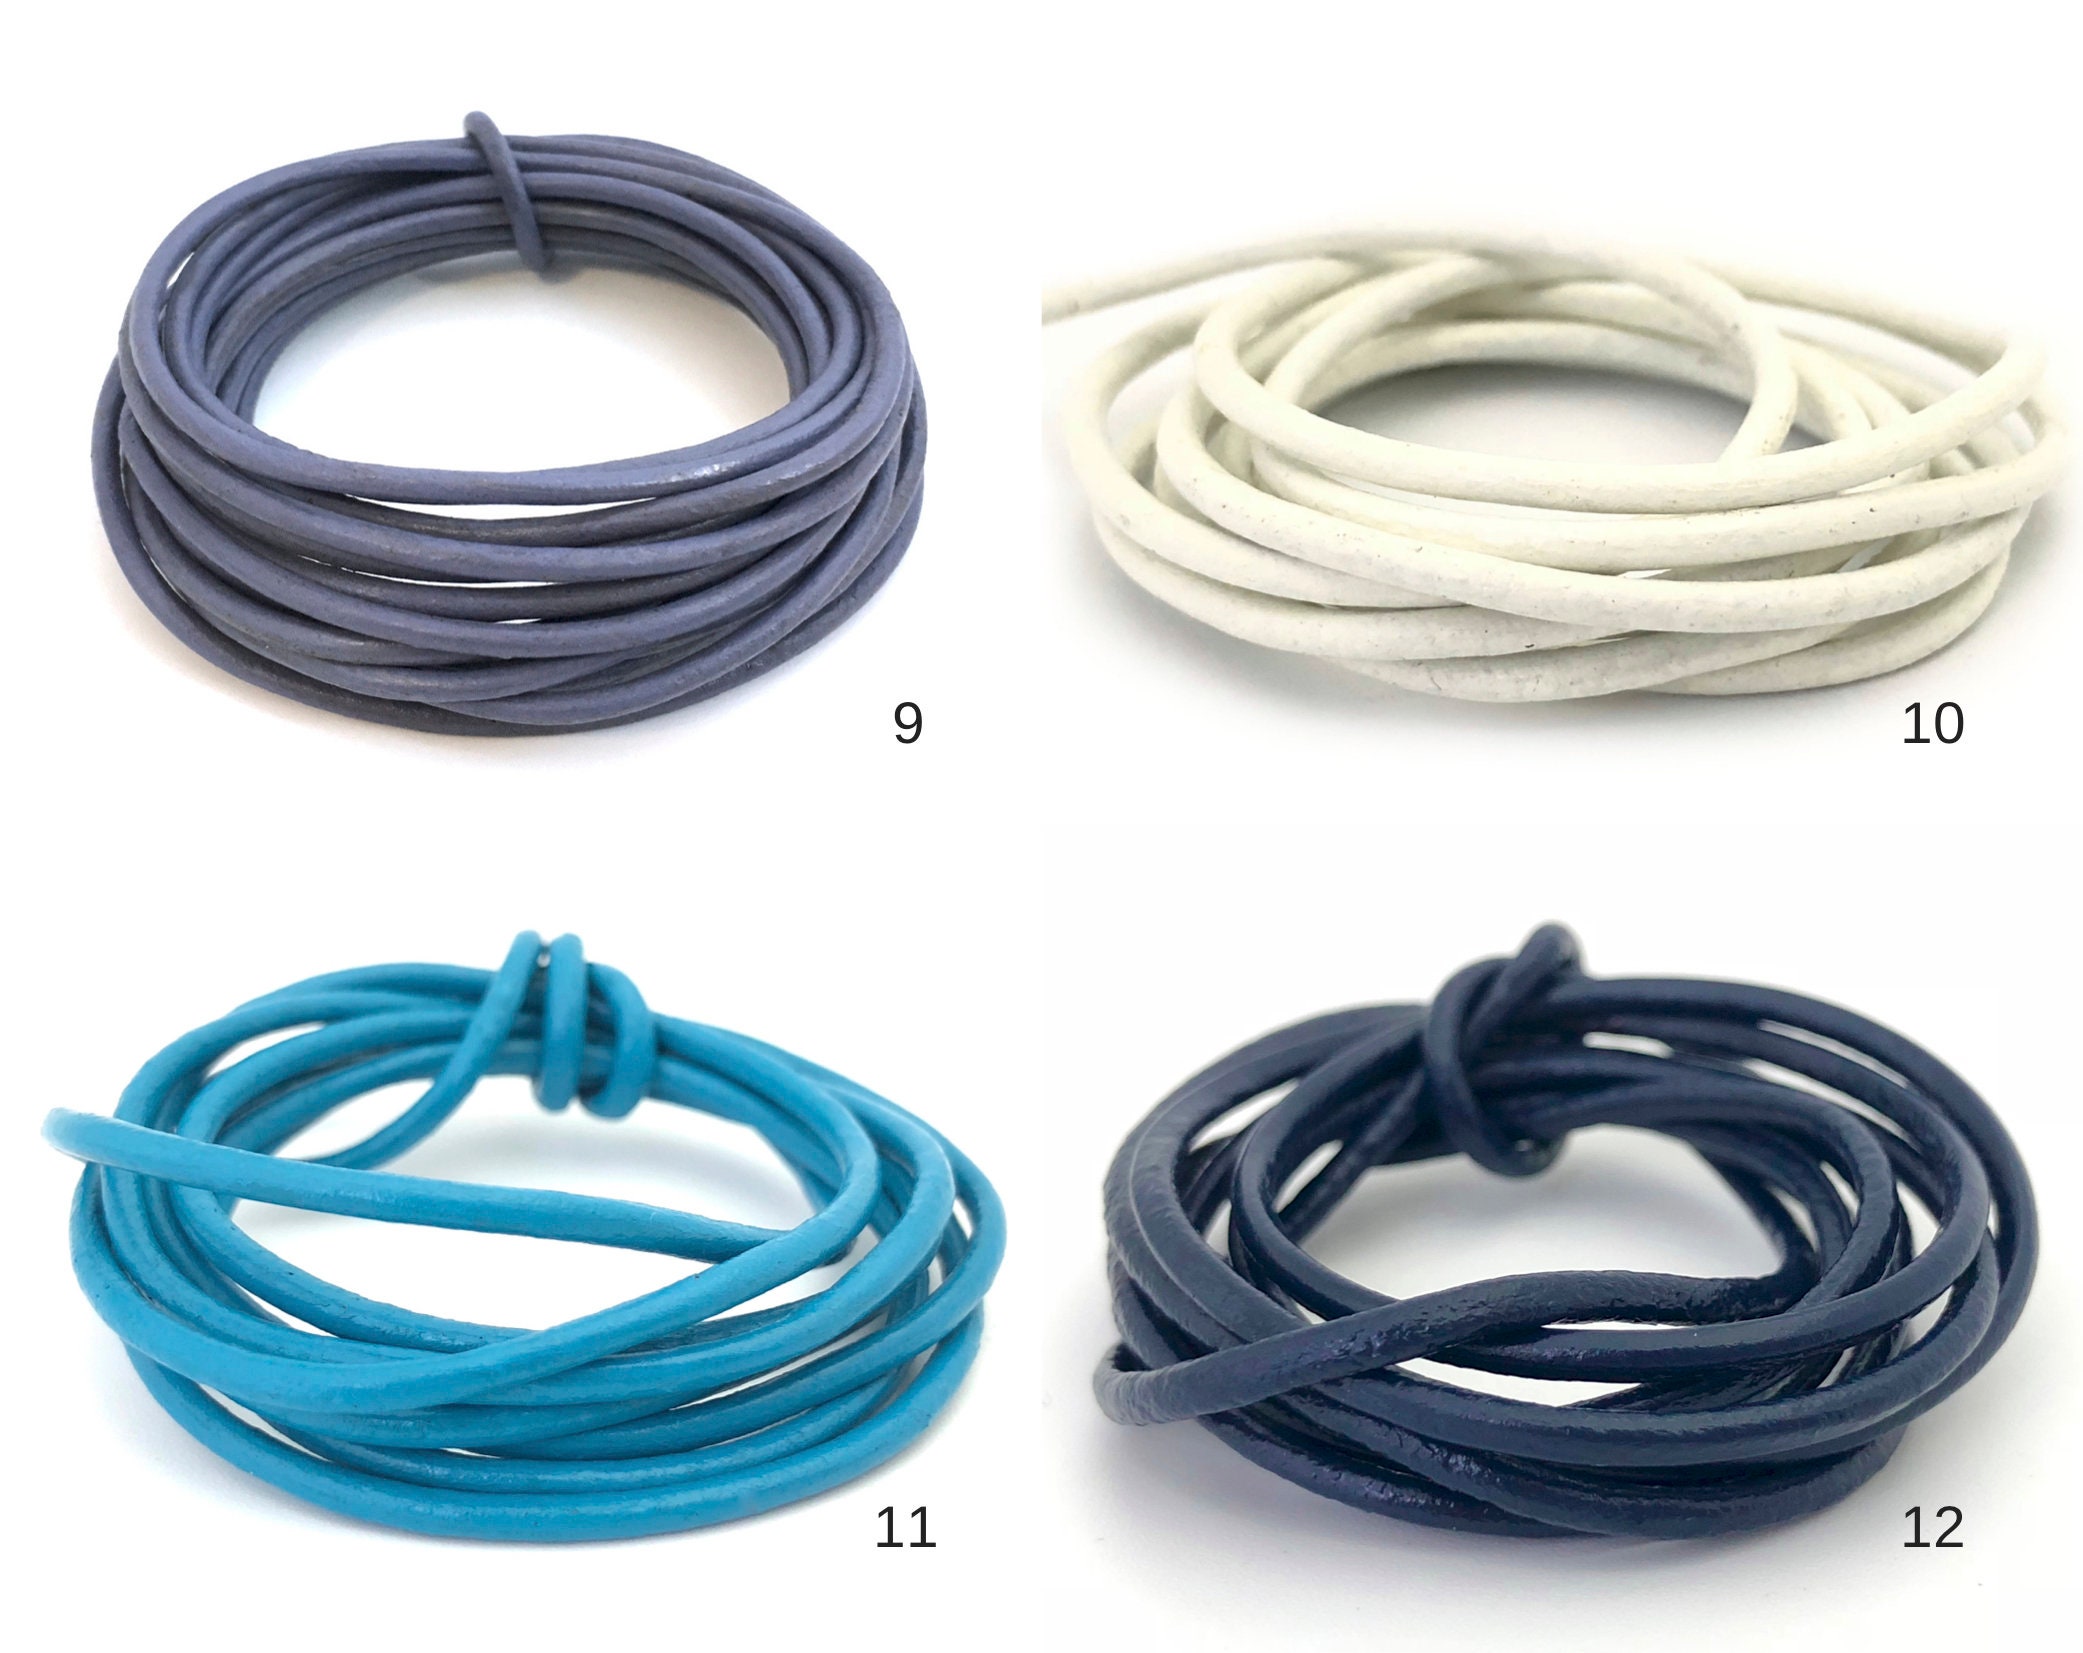  Leather Cord for Jewelry Making Kit, 24 Meters 2 mm Wide  Leather Cord Leather Jewelry Rope and 250 Pieces Jewelry Findings Necklace  Bracelets Craft Twine Accessories (Classic Colors) : Arts, Crafts & Sewing